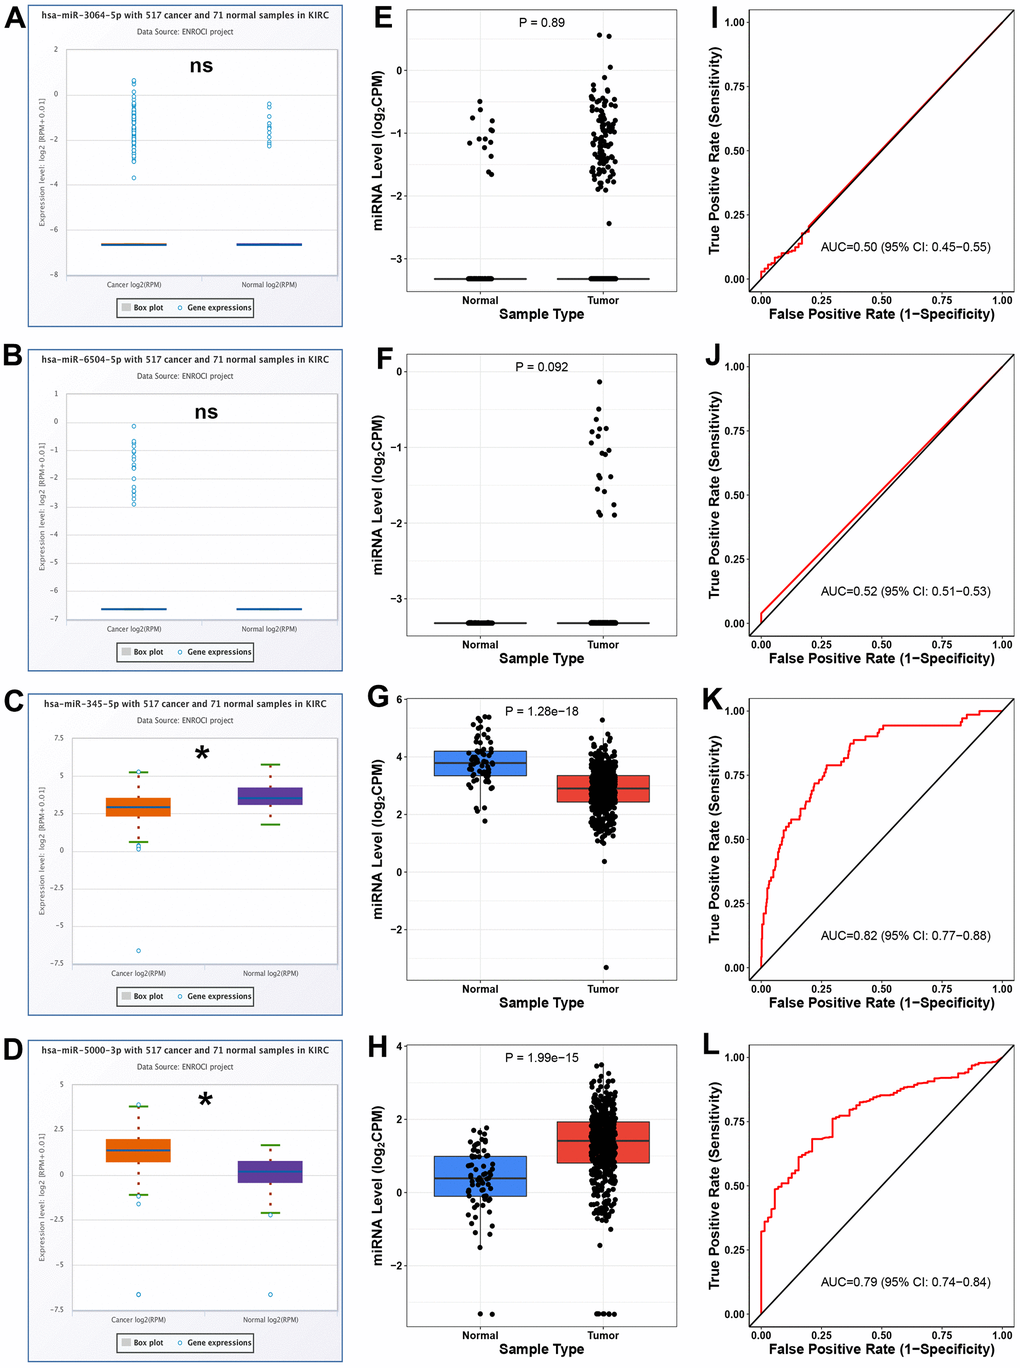 Analysis for the expression and diagnostic values of 4 potential miRNAs of hsa